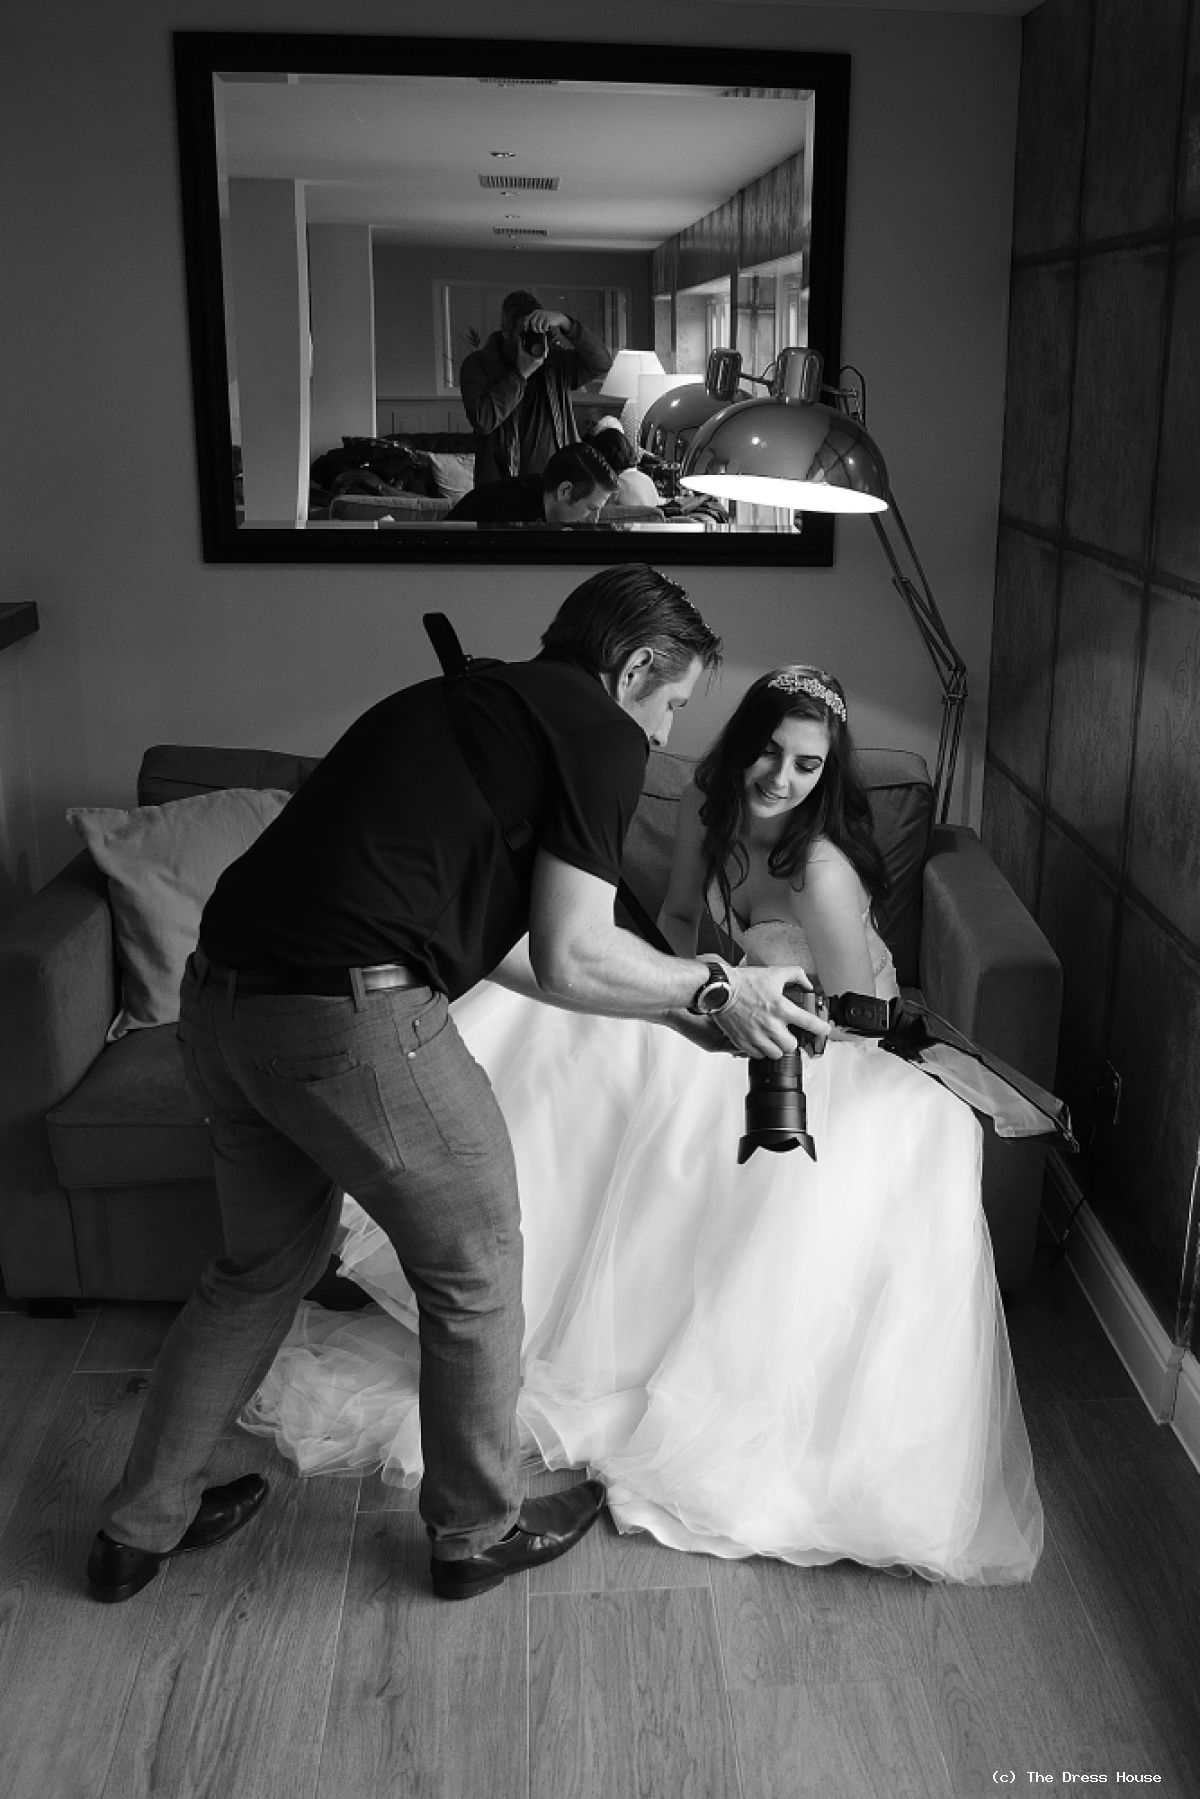 Behind The Scenes At Needham House Shoot